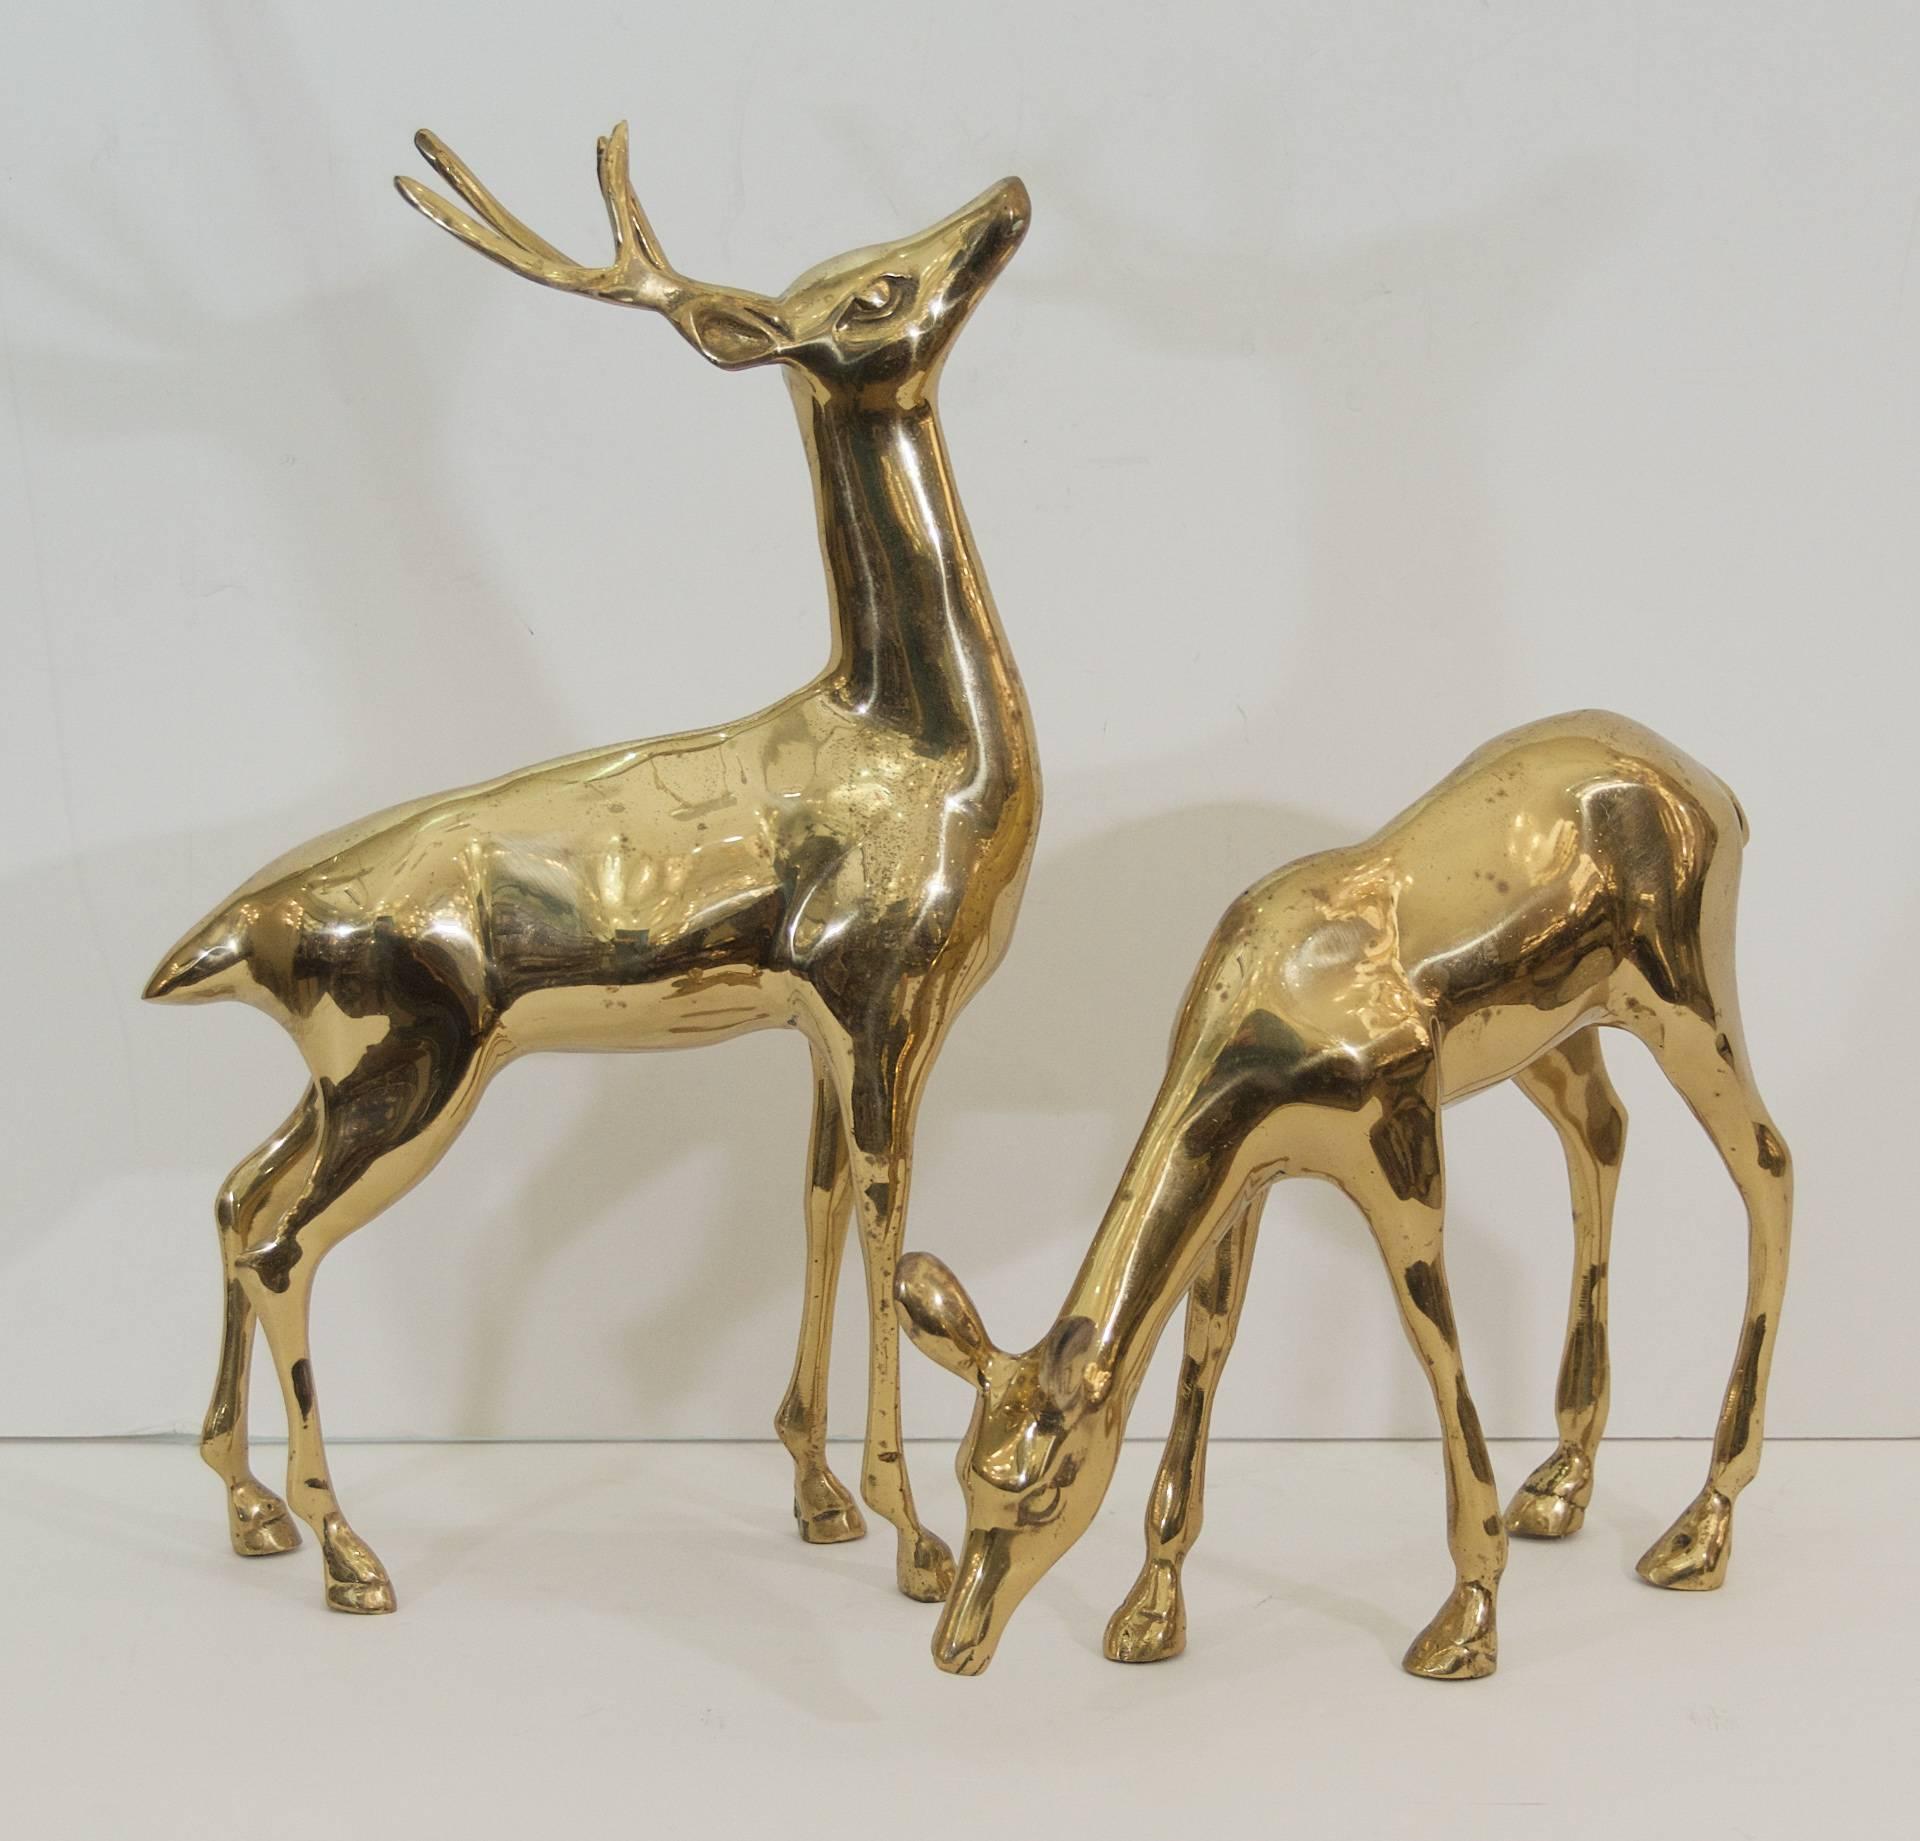 Generously sized pair of elegant reindeer in brass.

Dimensions listed are of larger, male deer.